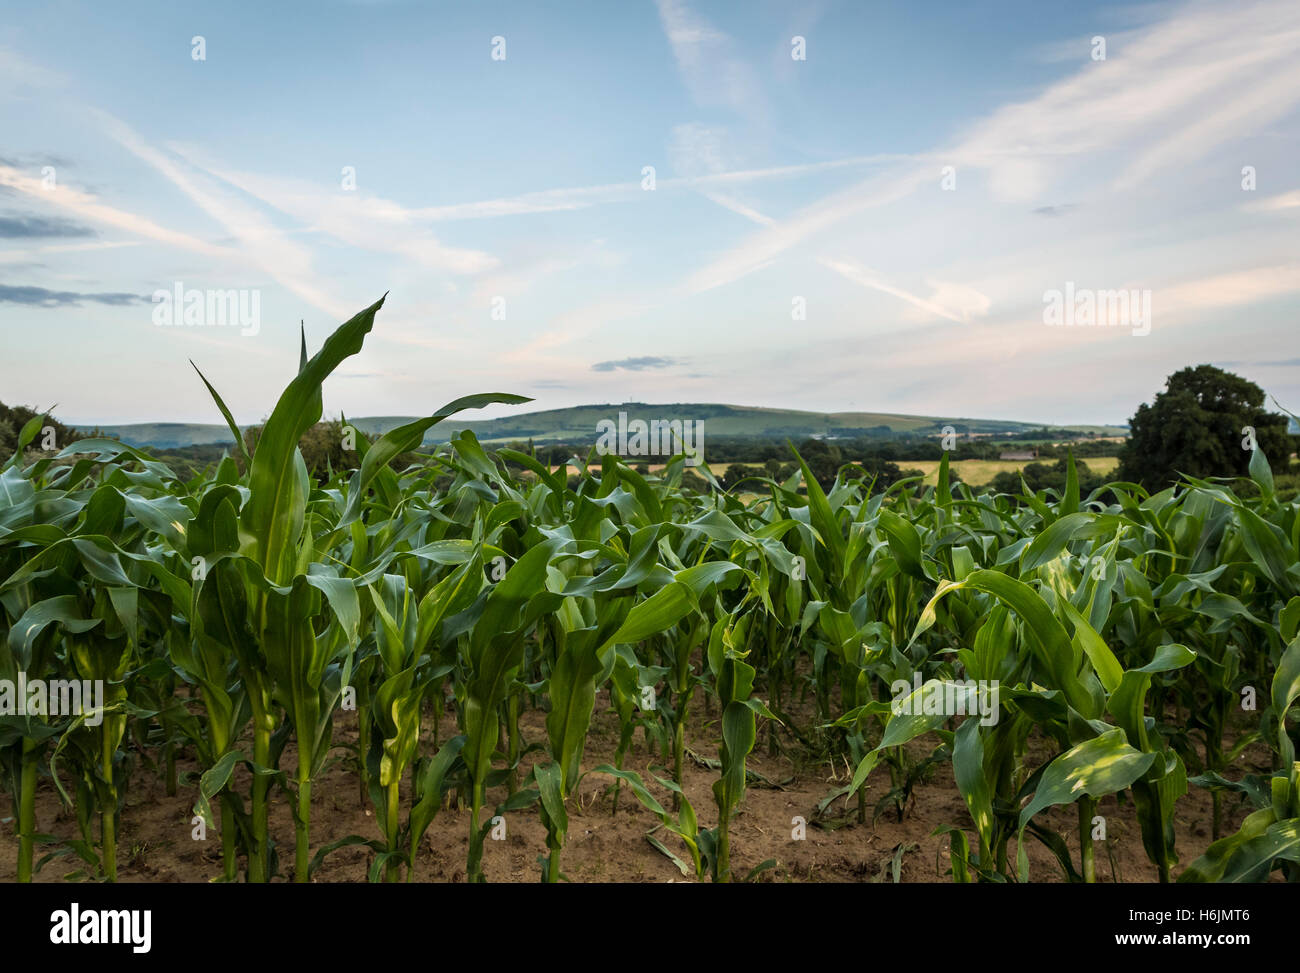 Field of corn or maize leaves on farmland in early Summer at sunset with the South Downs in the background, Sussex UK Stock Photo